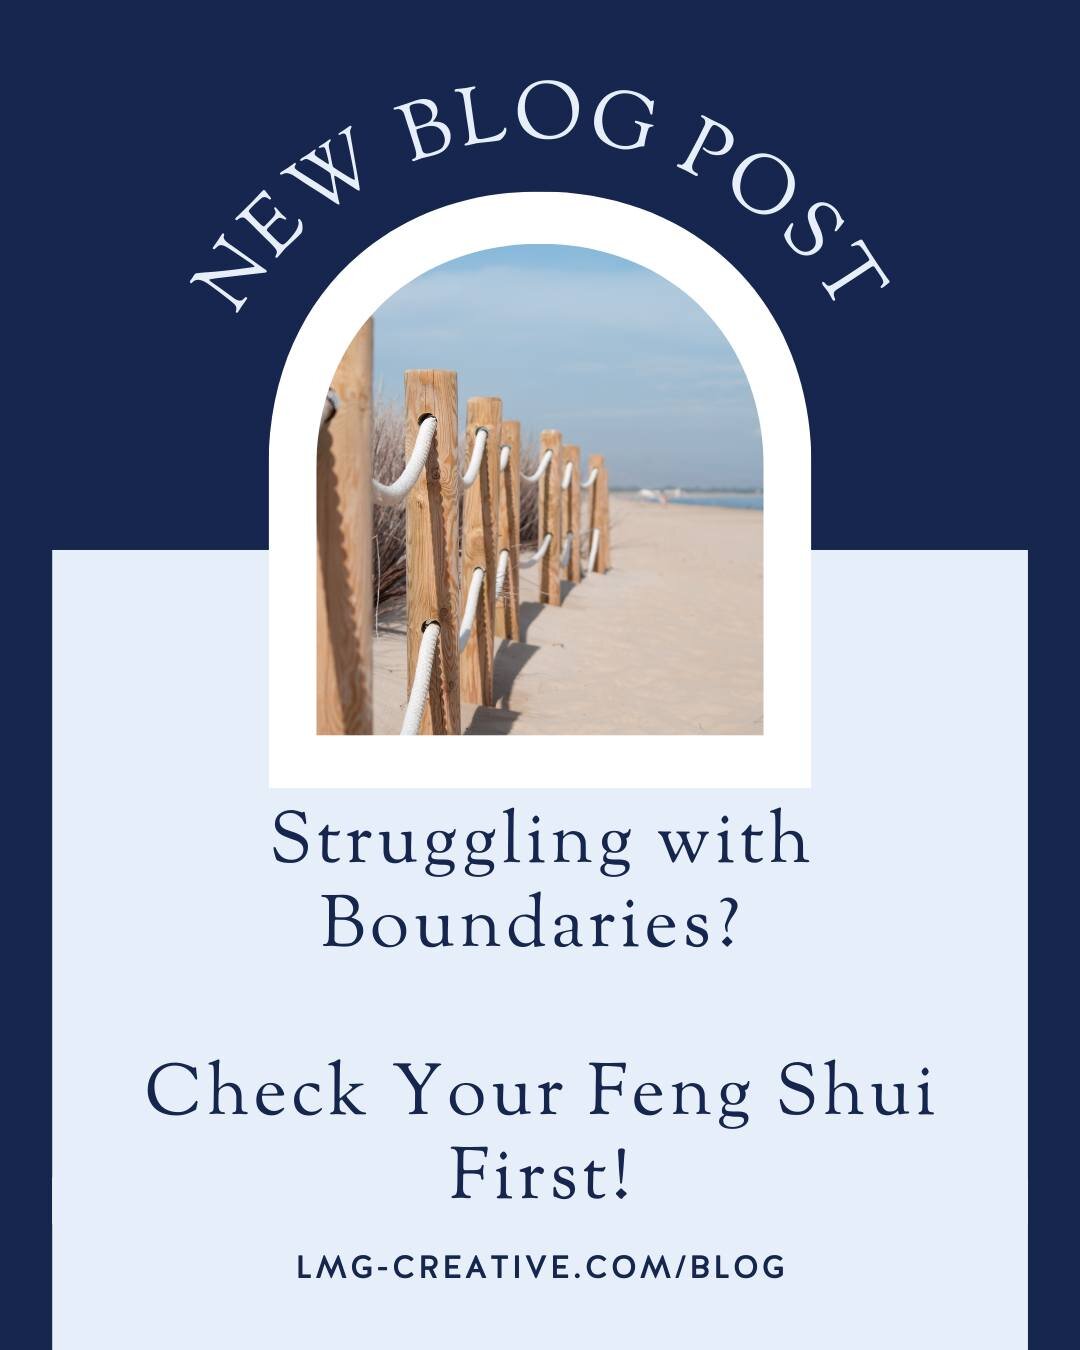 Setting healthy boundaries can be a struggle. 

And your Feng Shui Fairy Godmother's got a few tricks up her sleeve that can set you up for success.

Before you start going into full-blown eye roll mode 🙄, get curious and check your home's Feng Shui